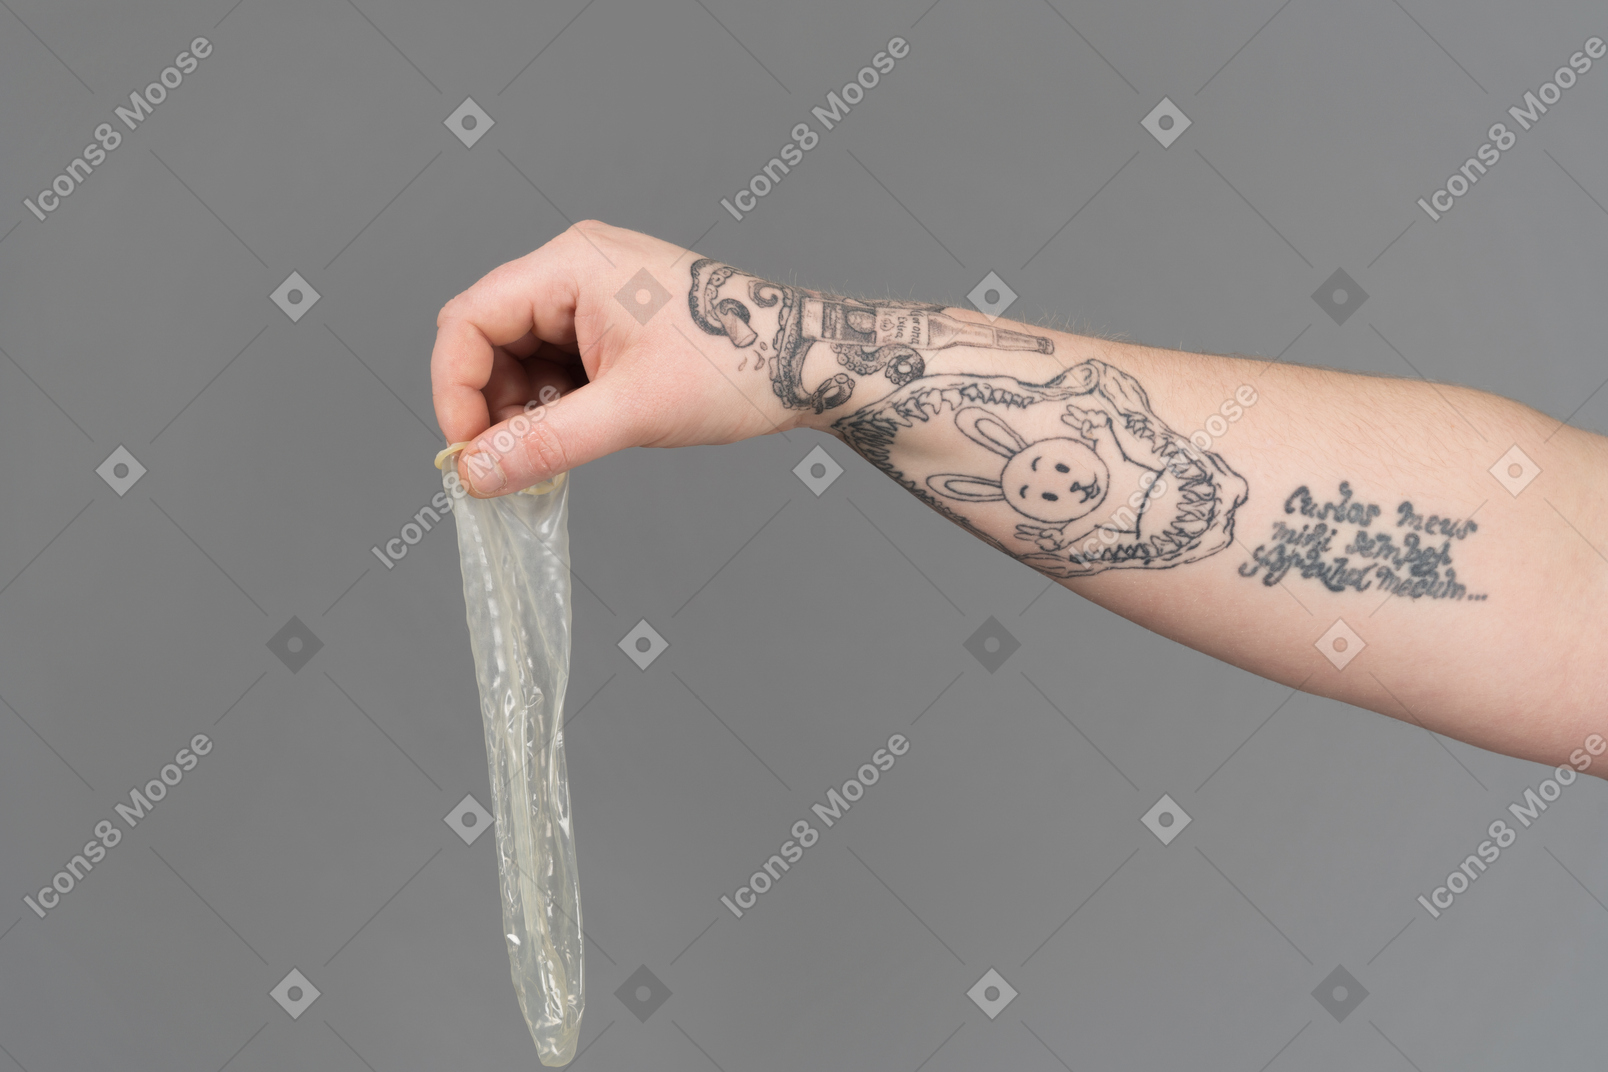 Holding a used condom